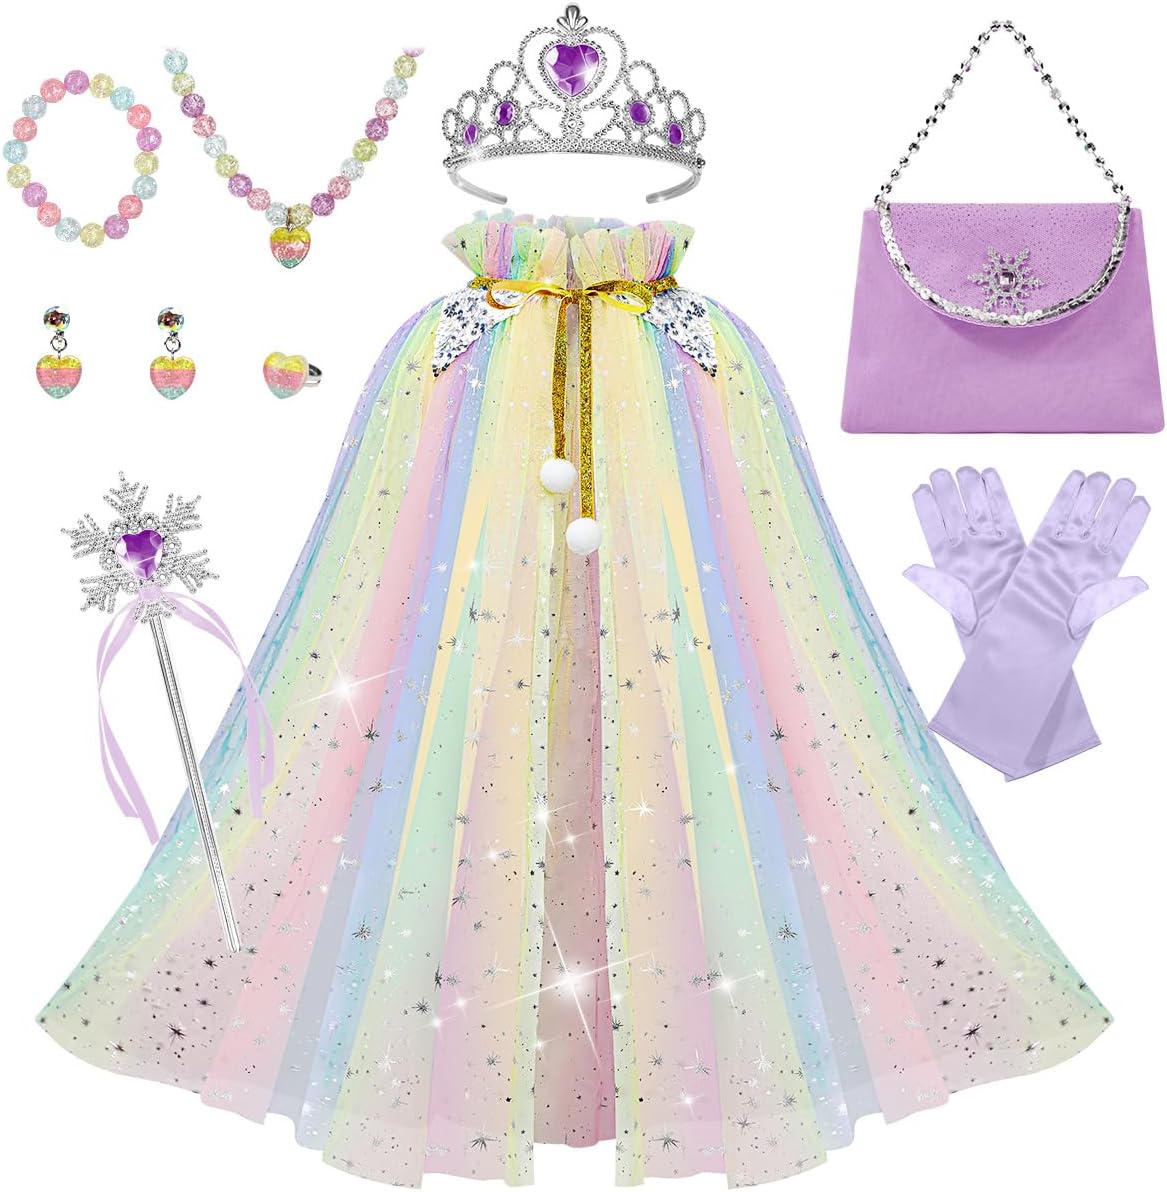 Princess Dress up Clothes for 3-8 Years Little Girl, 11Pcs Princess Cape with Crown - Cykapu